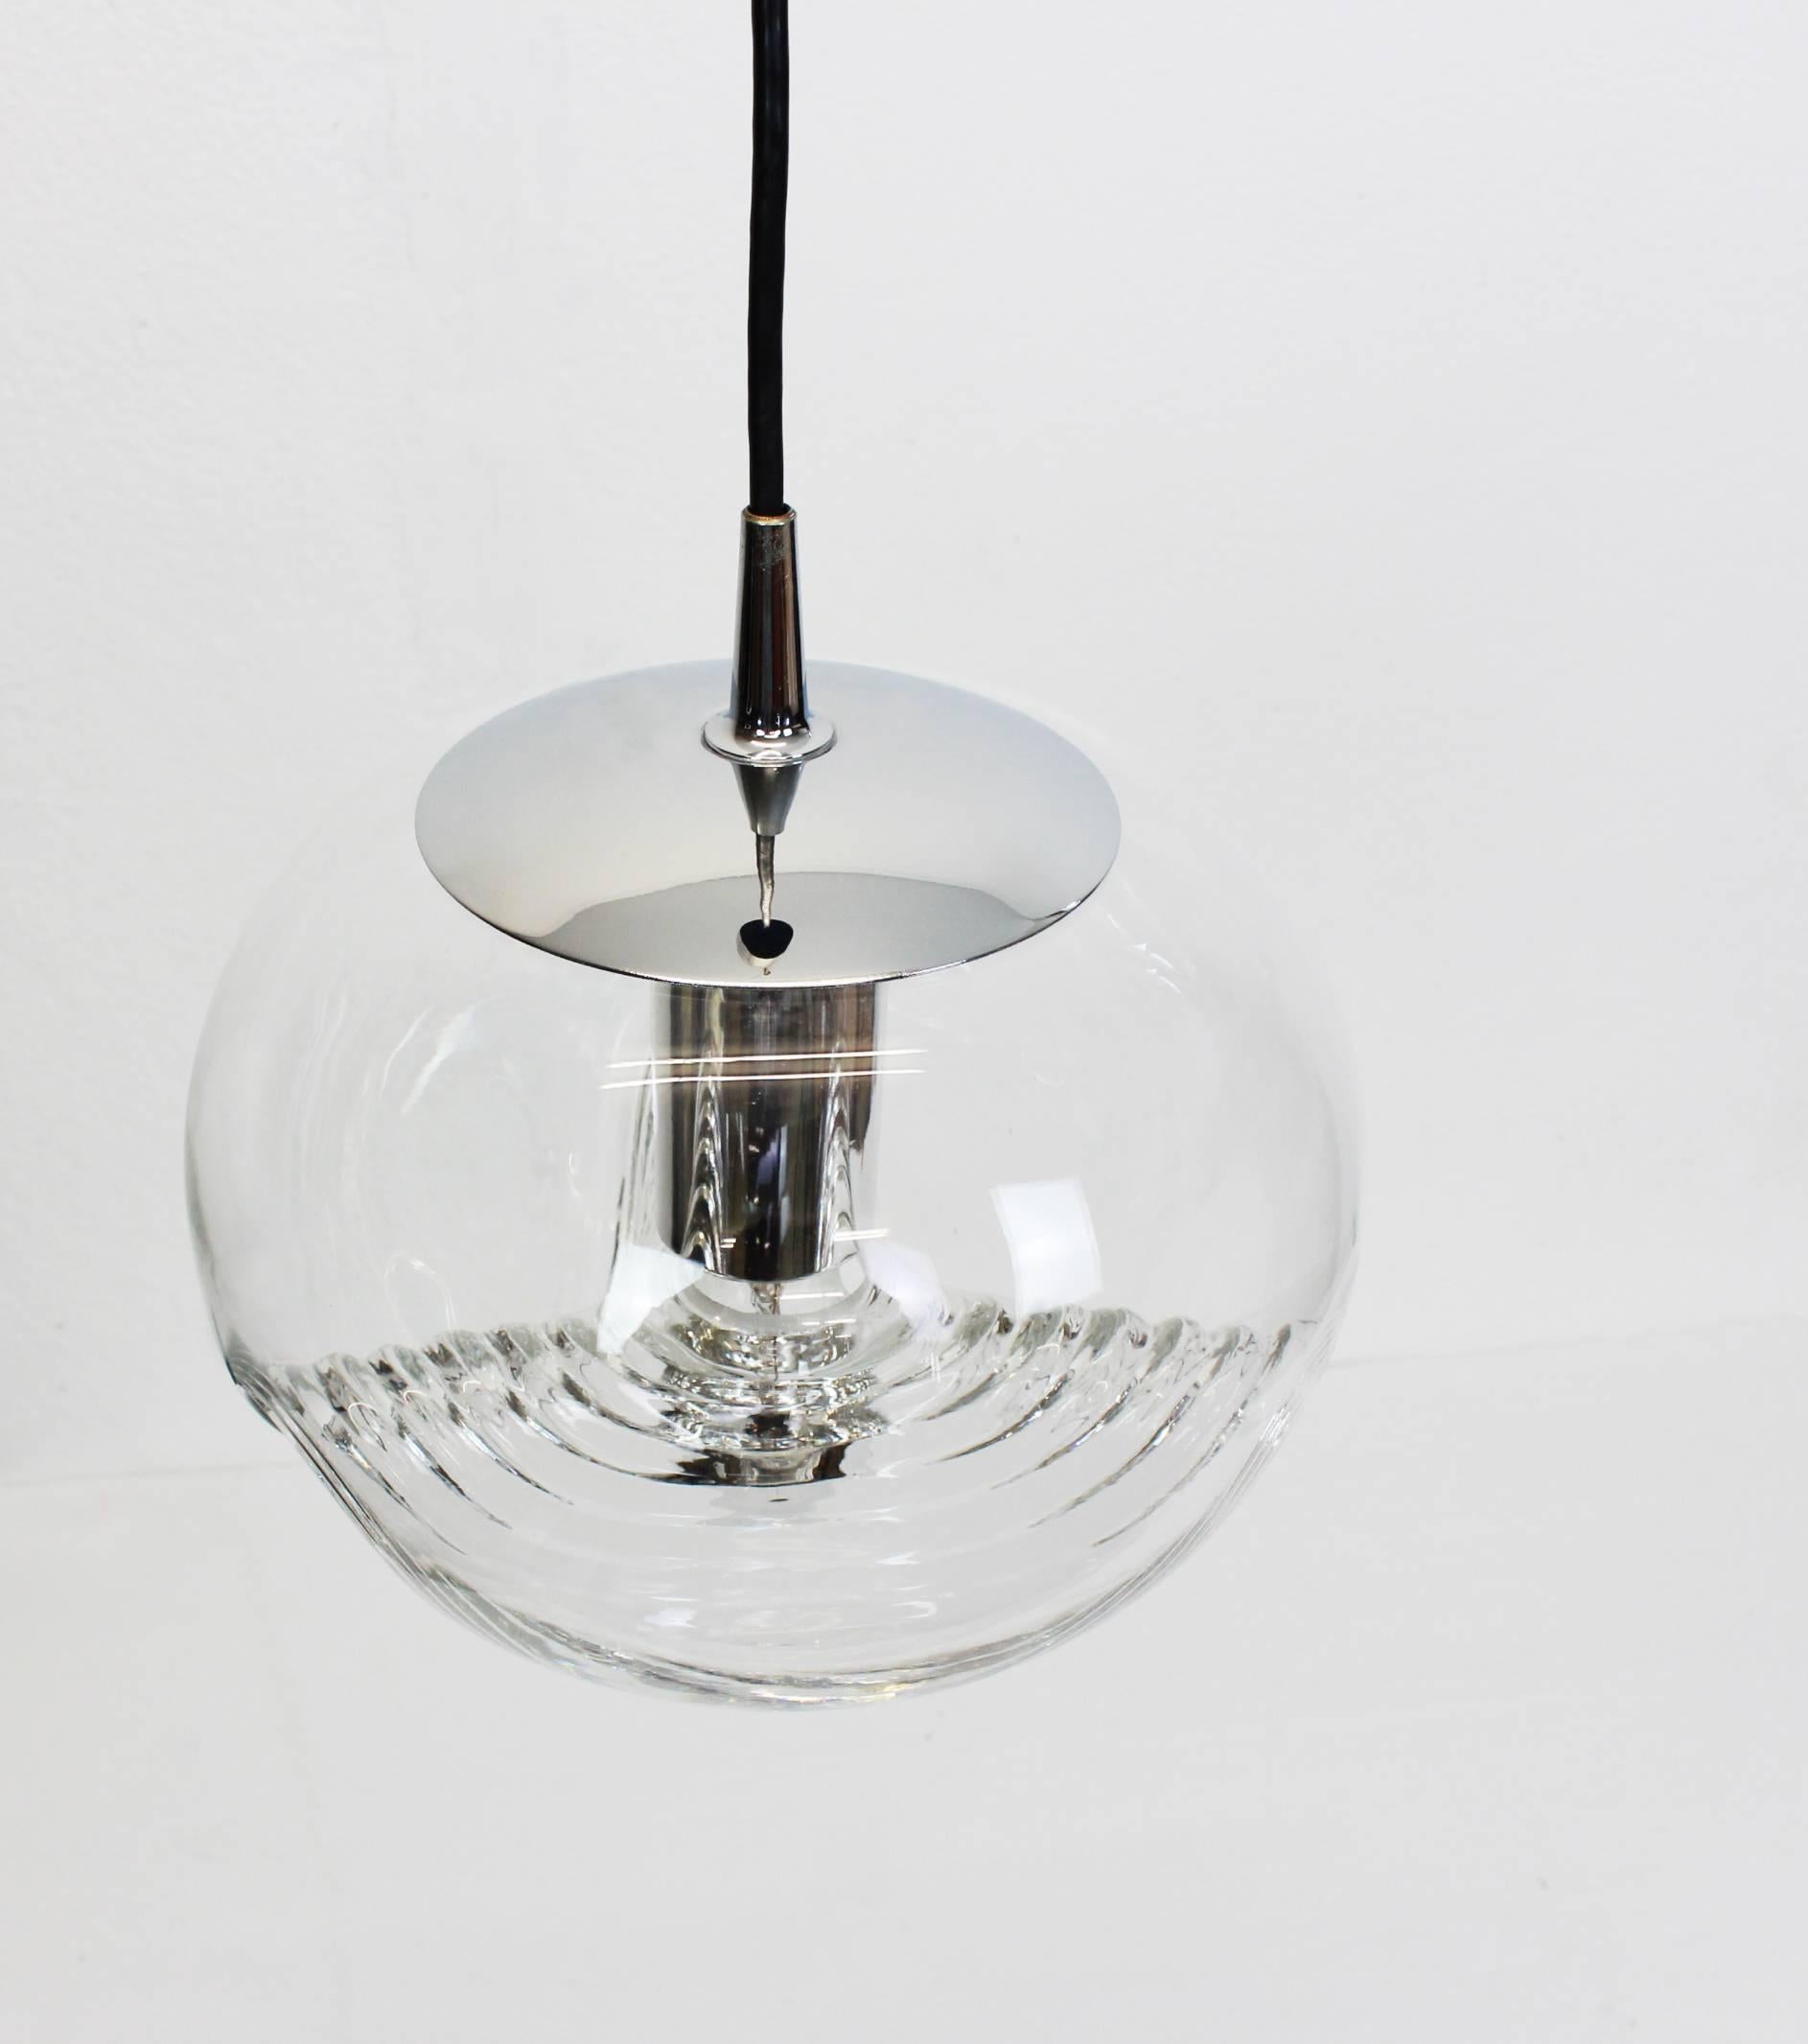 A special round Biomorphic glass pendant designed by Koch & Lowy for Peill & Putzler, manufactured in Germany, circa the 1970s.

High quality and in very good condition. Cleaned, well-wired and ready to use. 

The fixture requires 1x E27 Standard